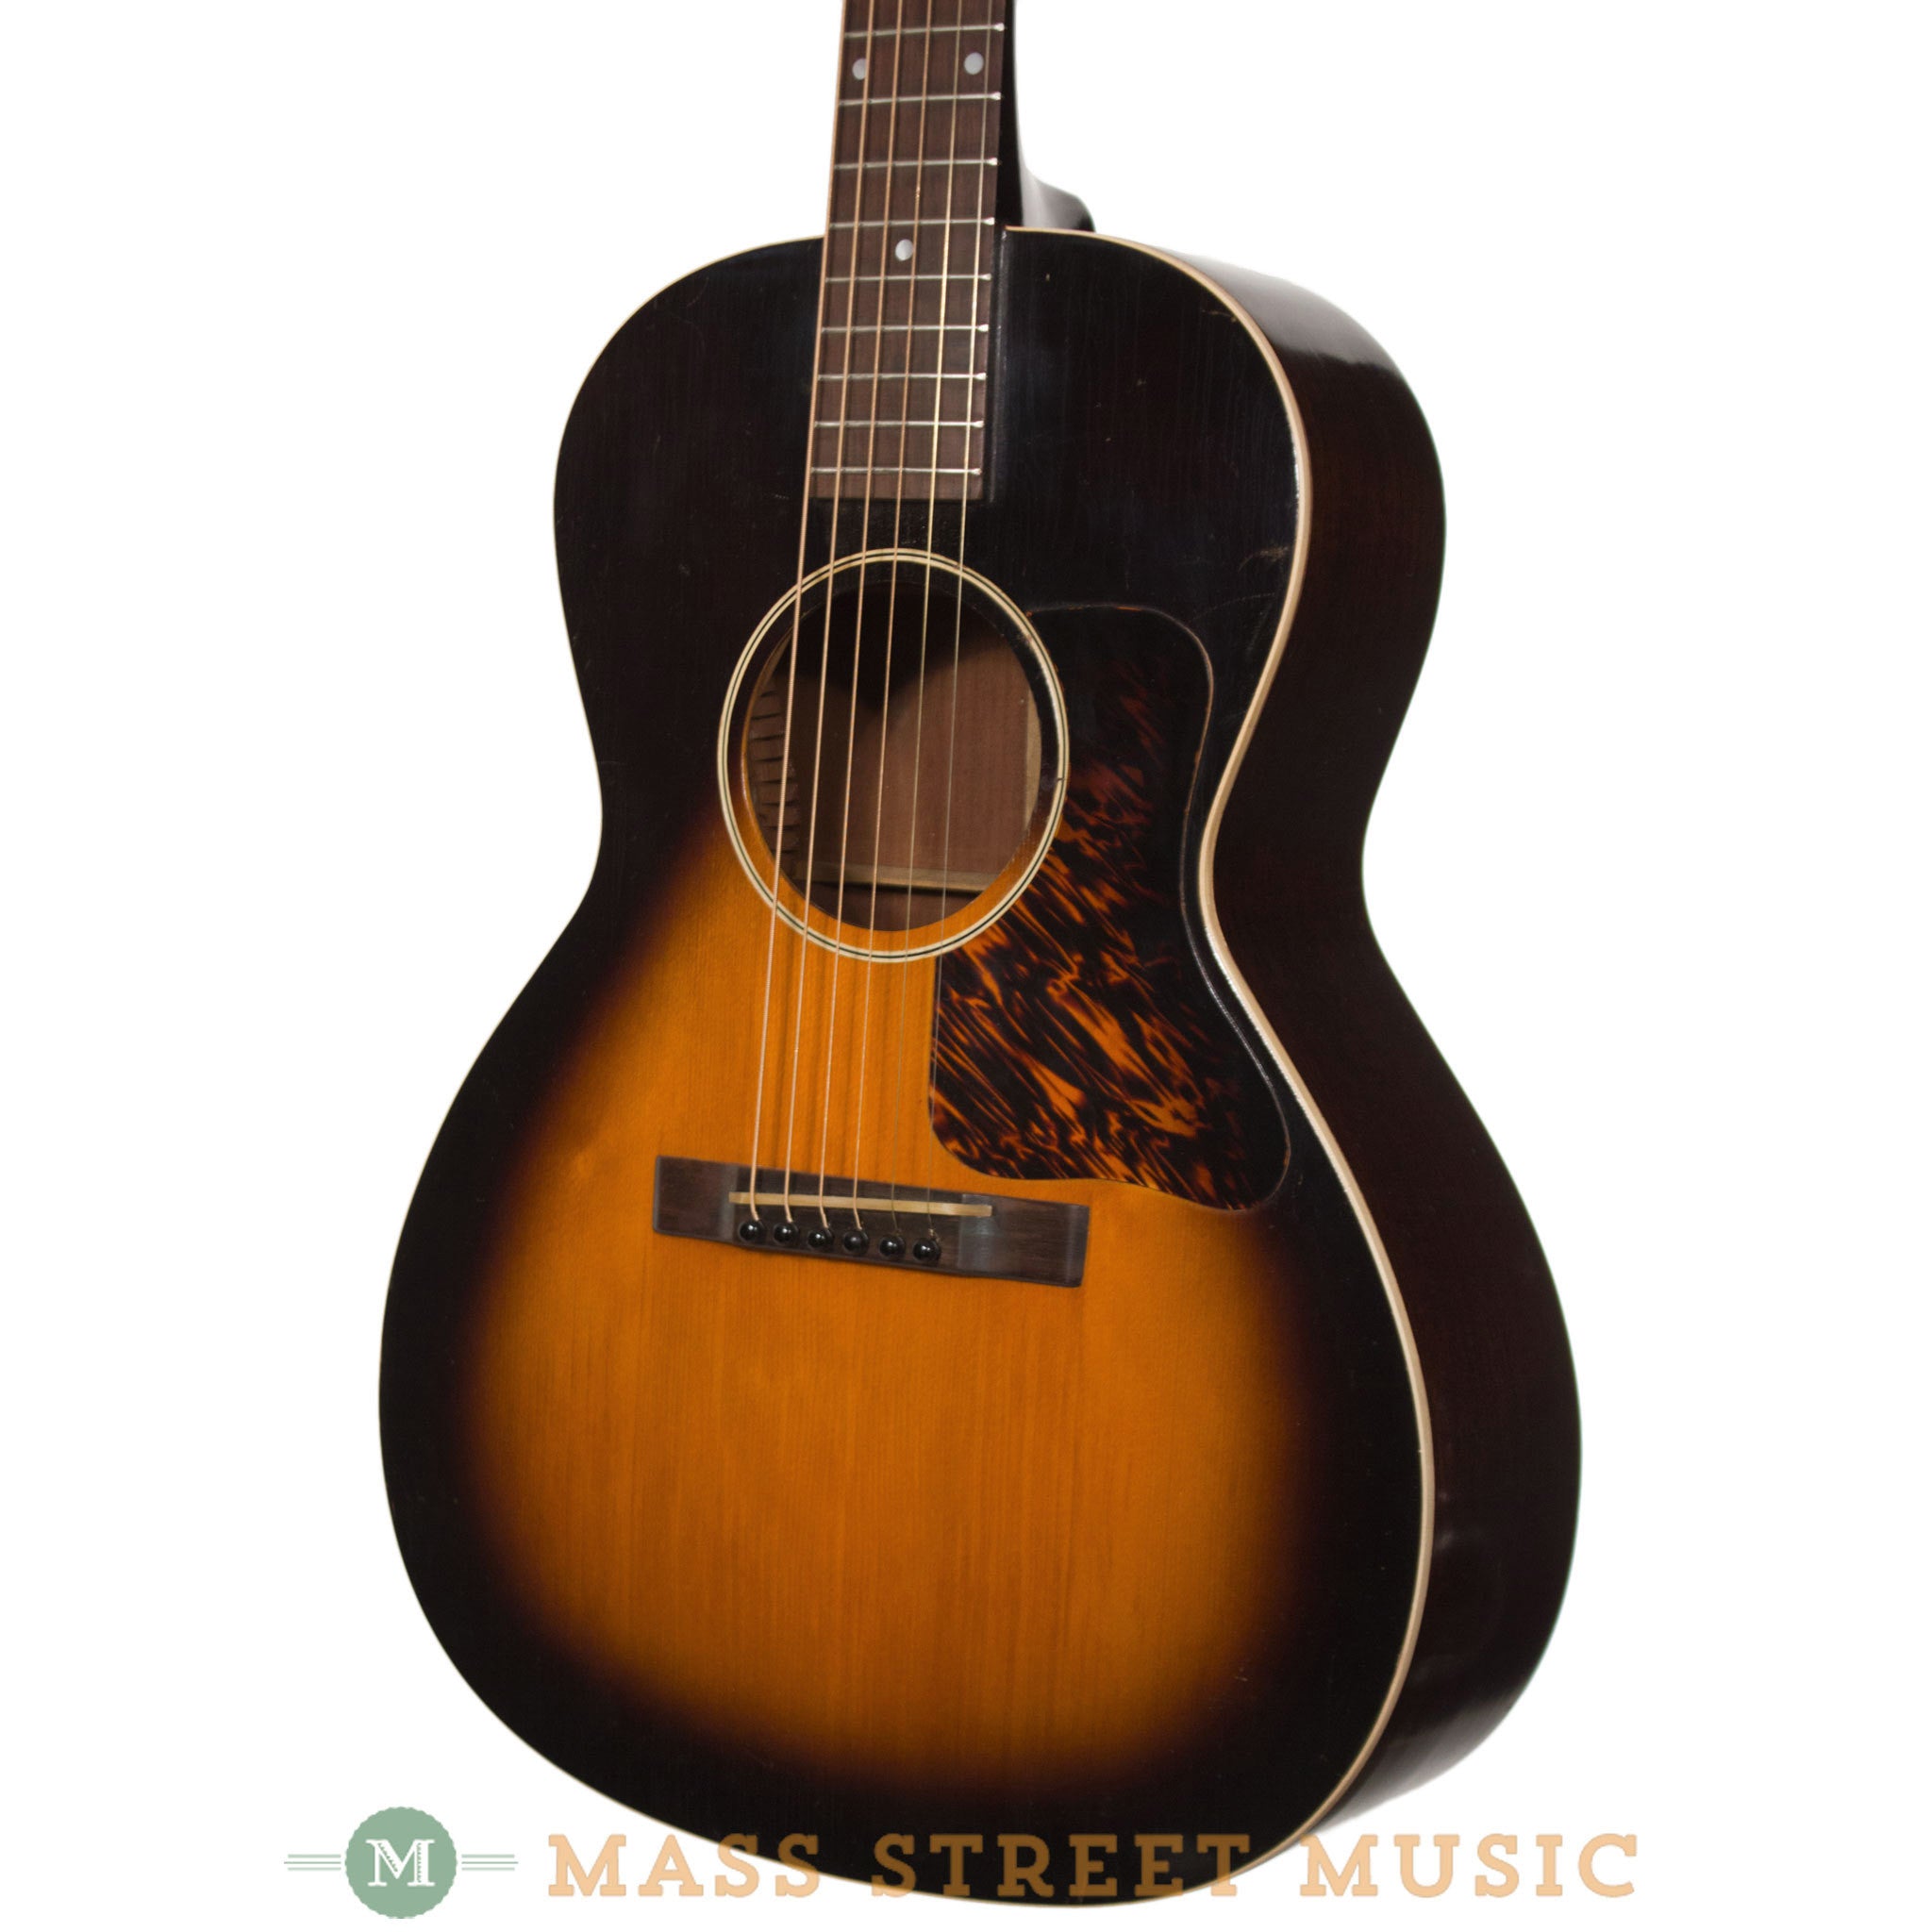 guitar vintage gibson acoustic